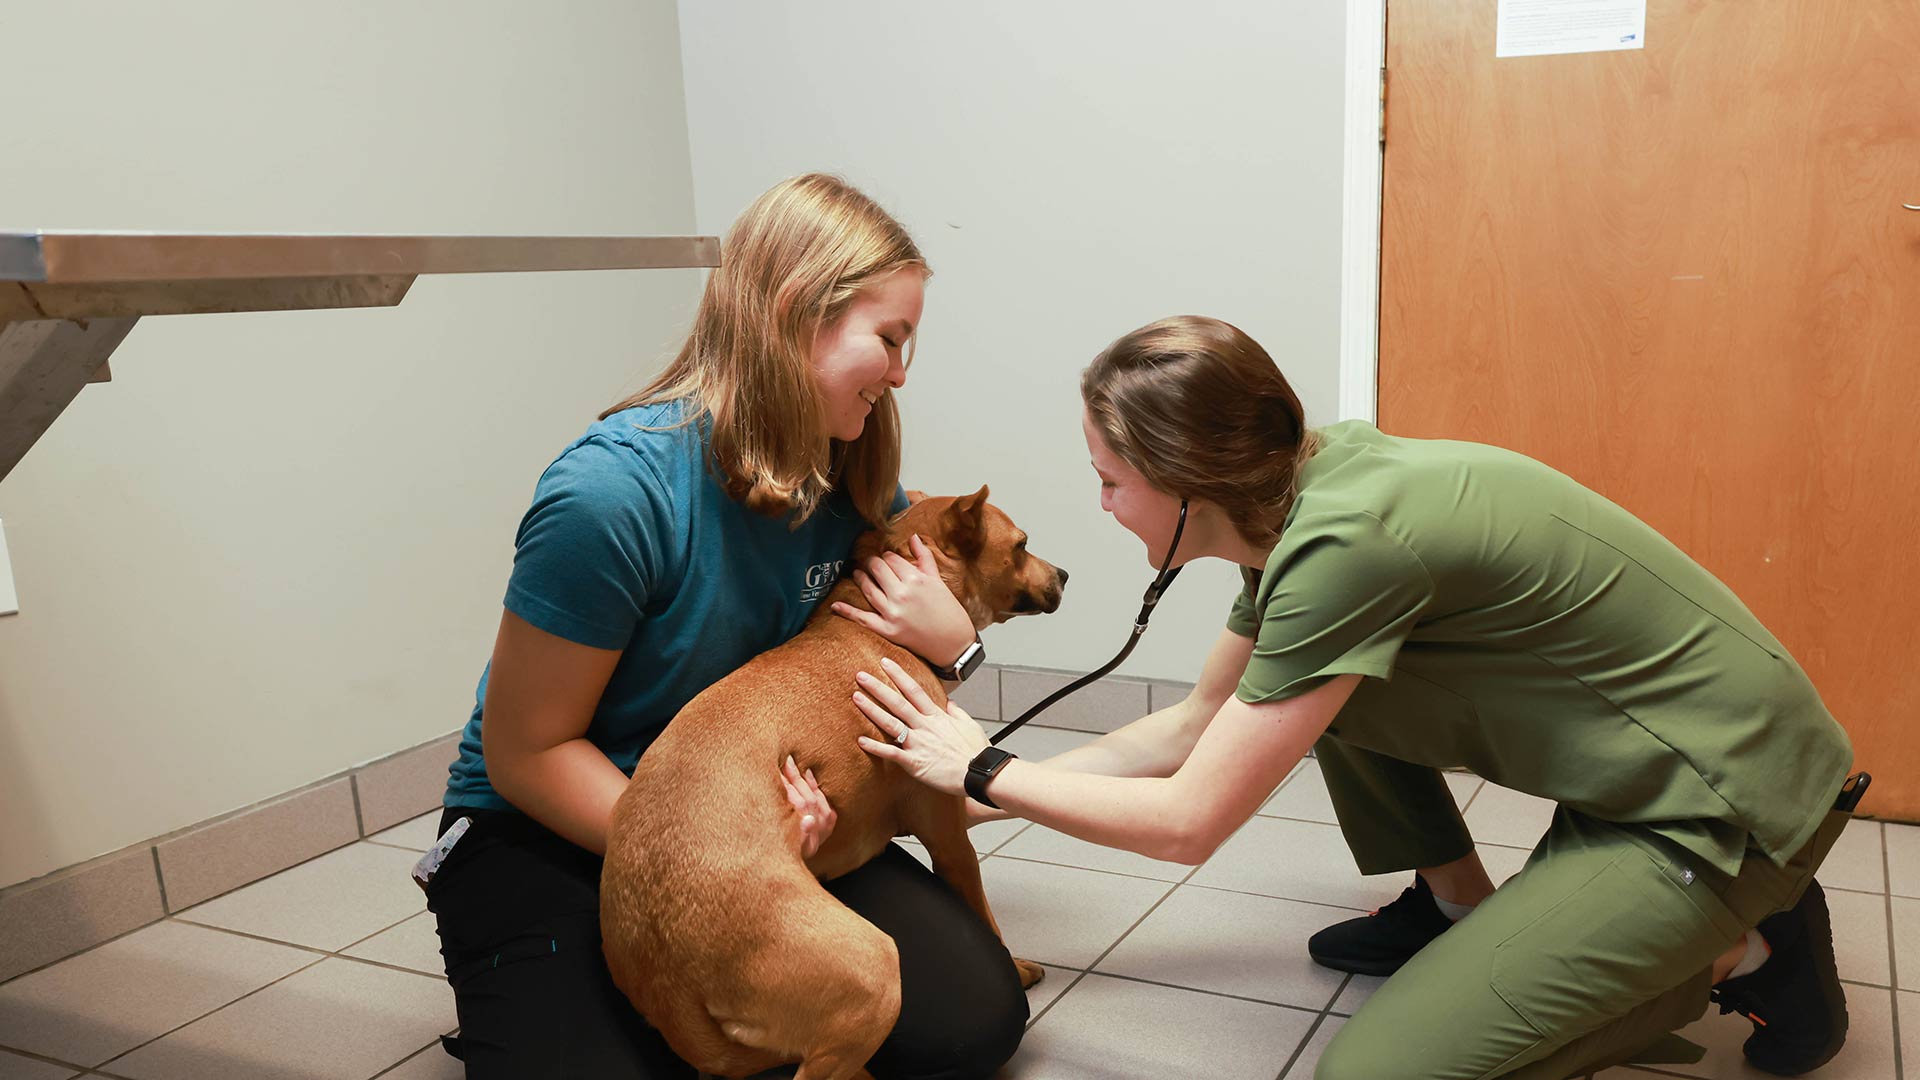 Pre-vet student and veterinarian doing medical checkup on a dog.